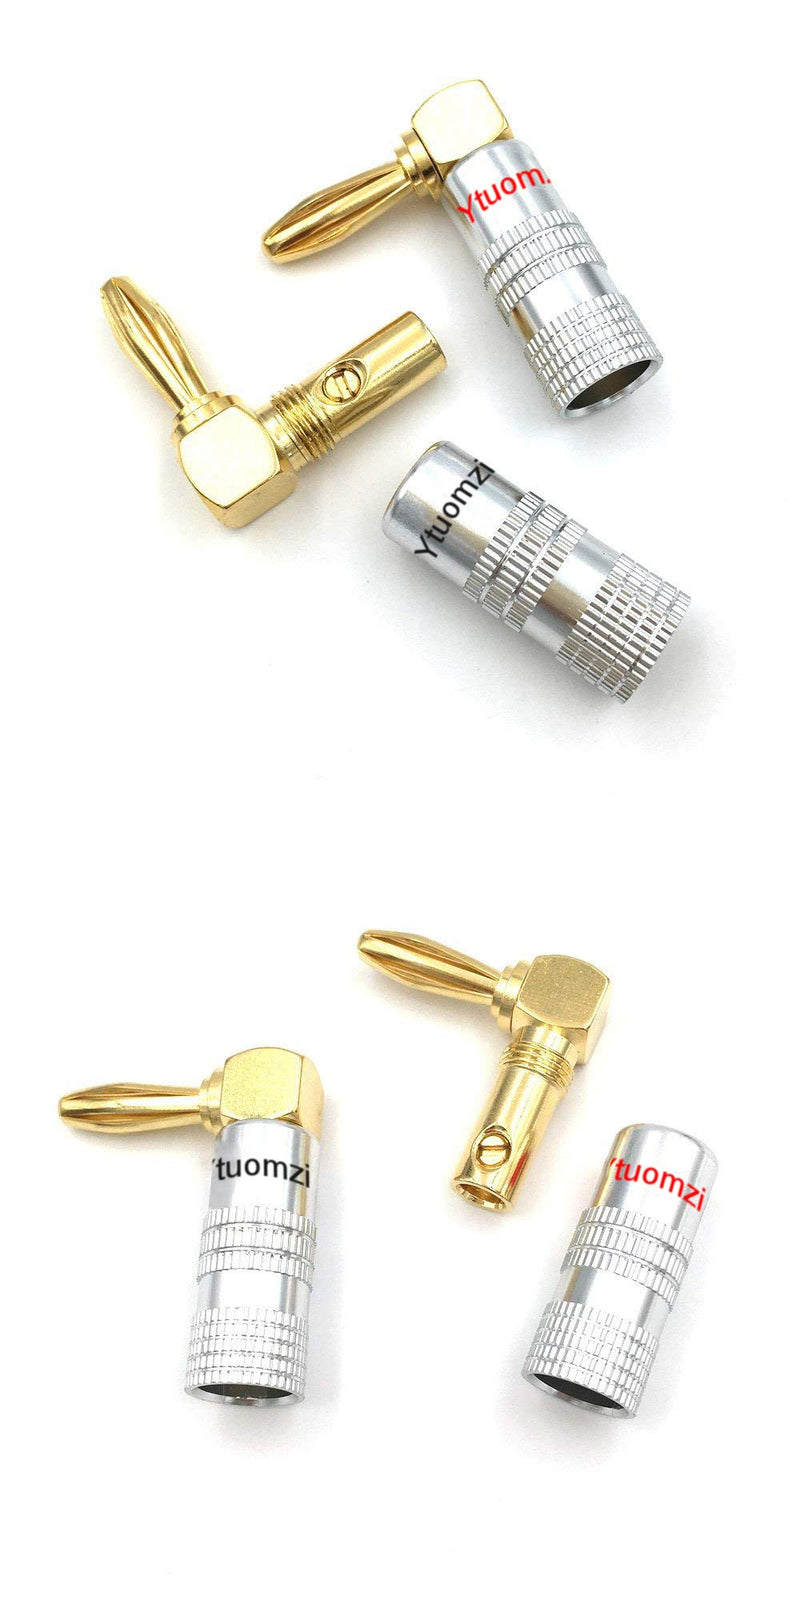 4PCS Right Angle Speaker Banana Plugs 90°Degree 24K Gold Plated Audio Jack Connector L Shape Speaker Adapter for Speaker Cable,2 Black and 2 Red